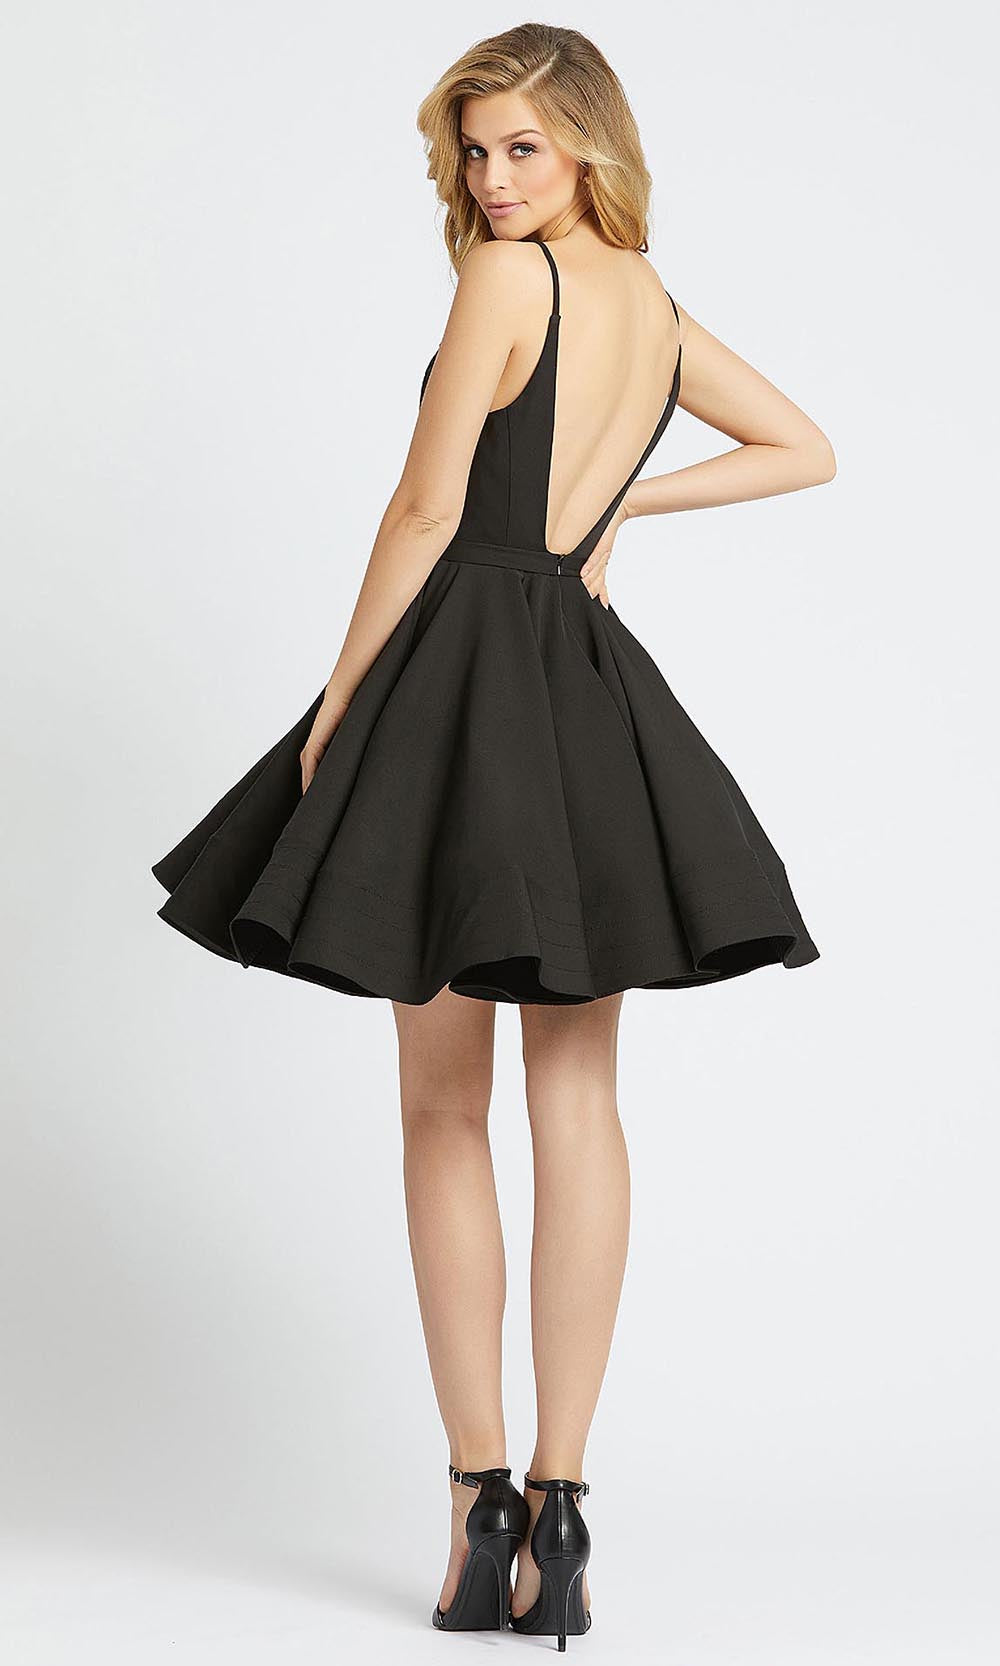 Strappy-Back Short Simple Cute Homecoming Dress Black / XSmall